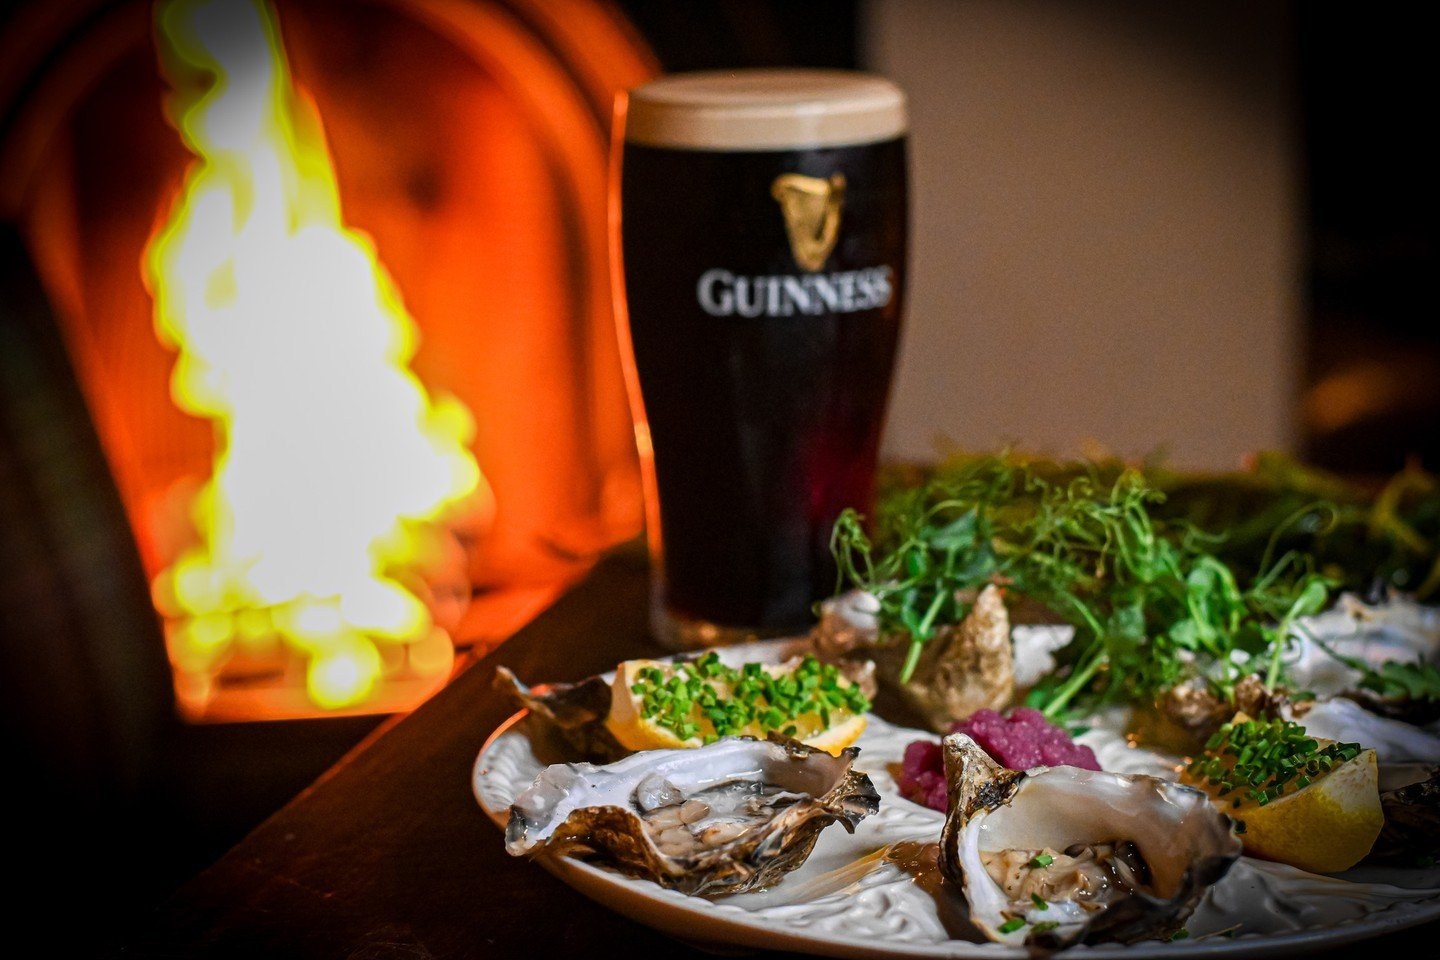 Fresh Clew Bay oysters and a pint of Guinness at The Tavern